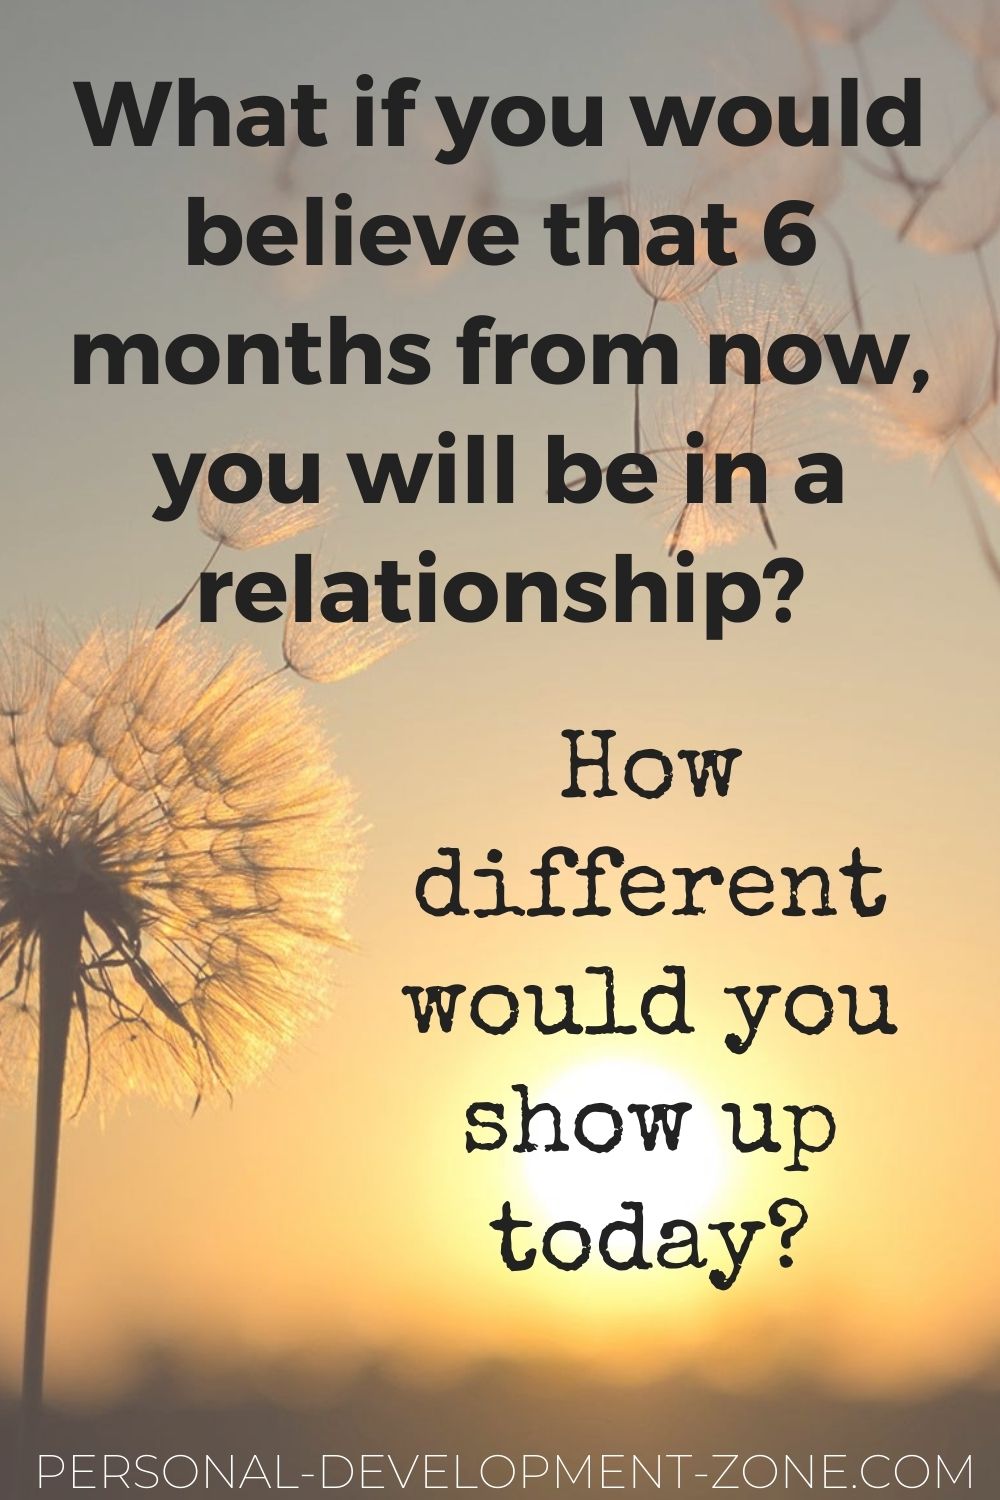 dating quotes what if you would believe that 6 months from now you will be in a relationship how different would you show up today